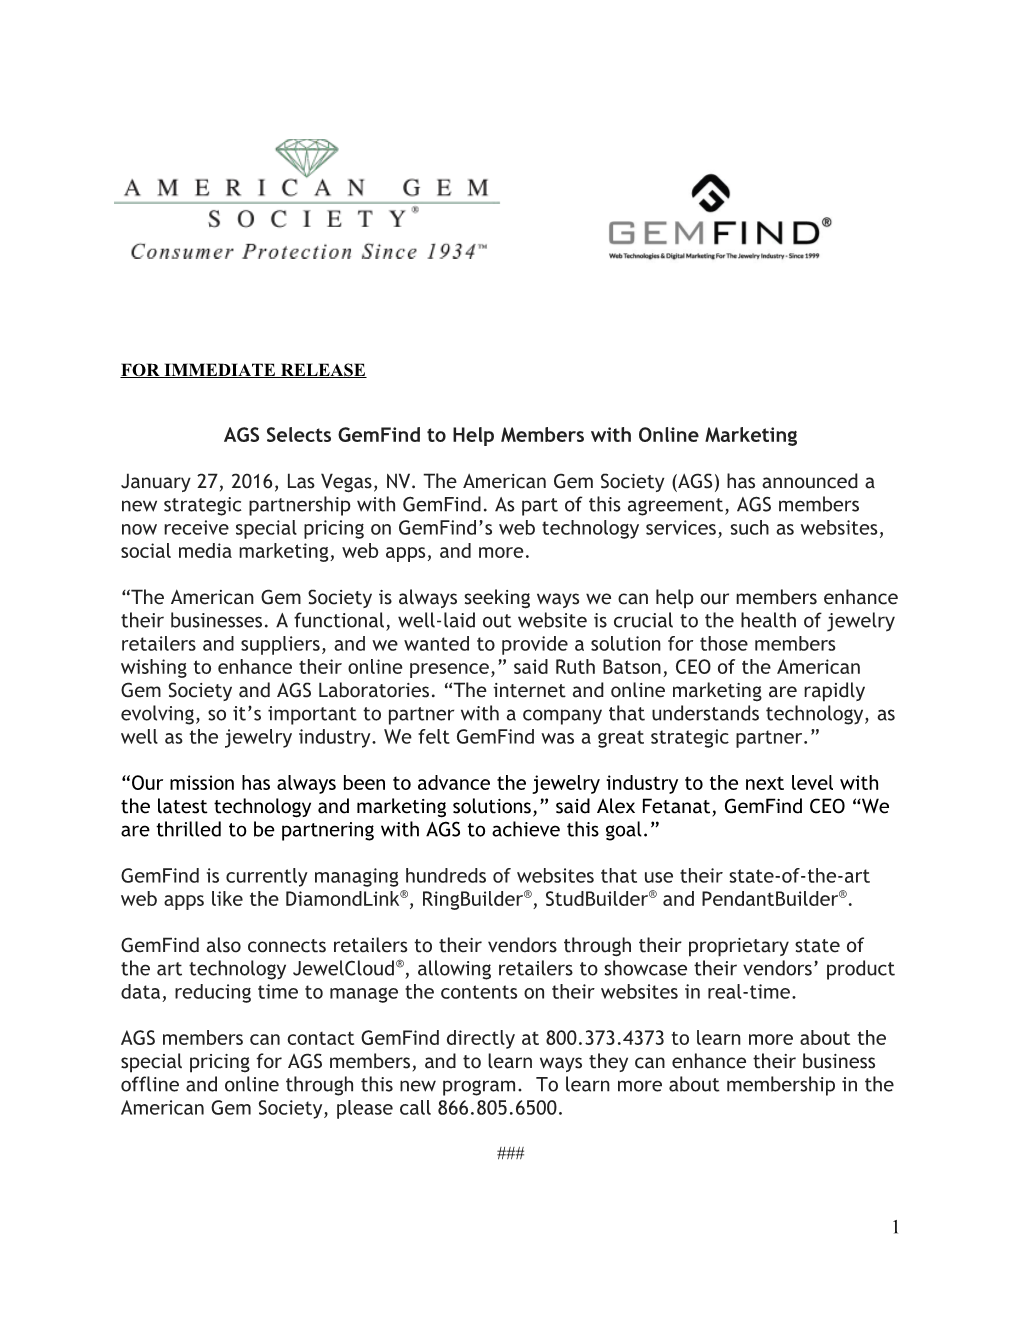 AGS Selects Gemfind to Help Members with Online Marketing